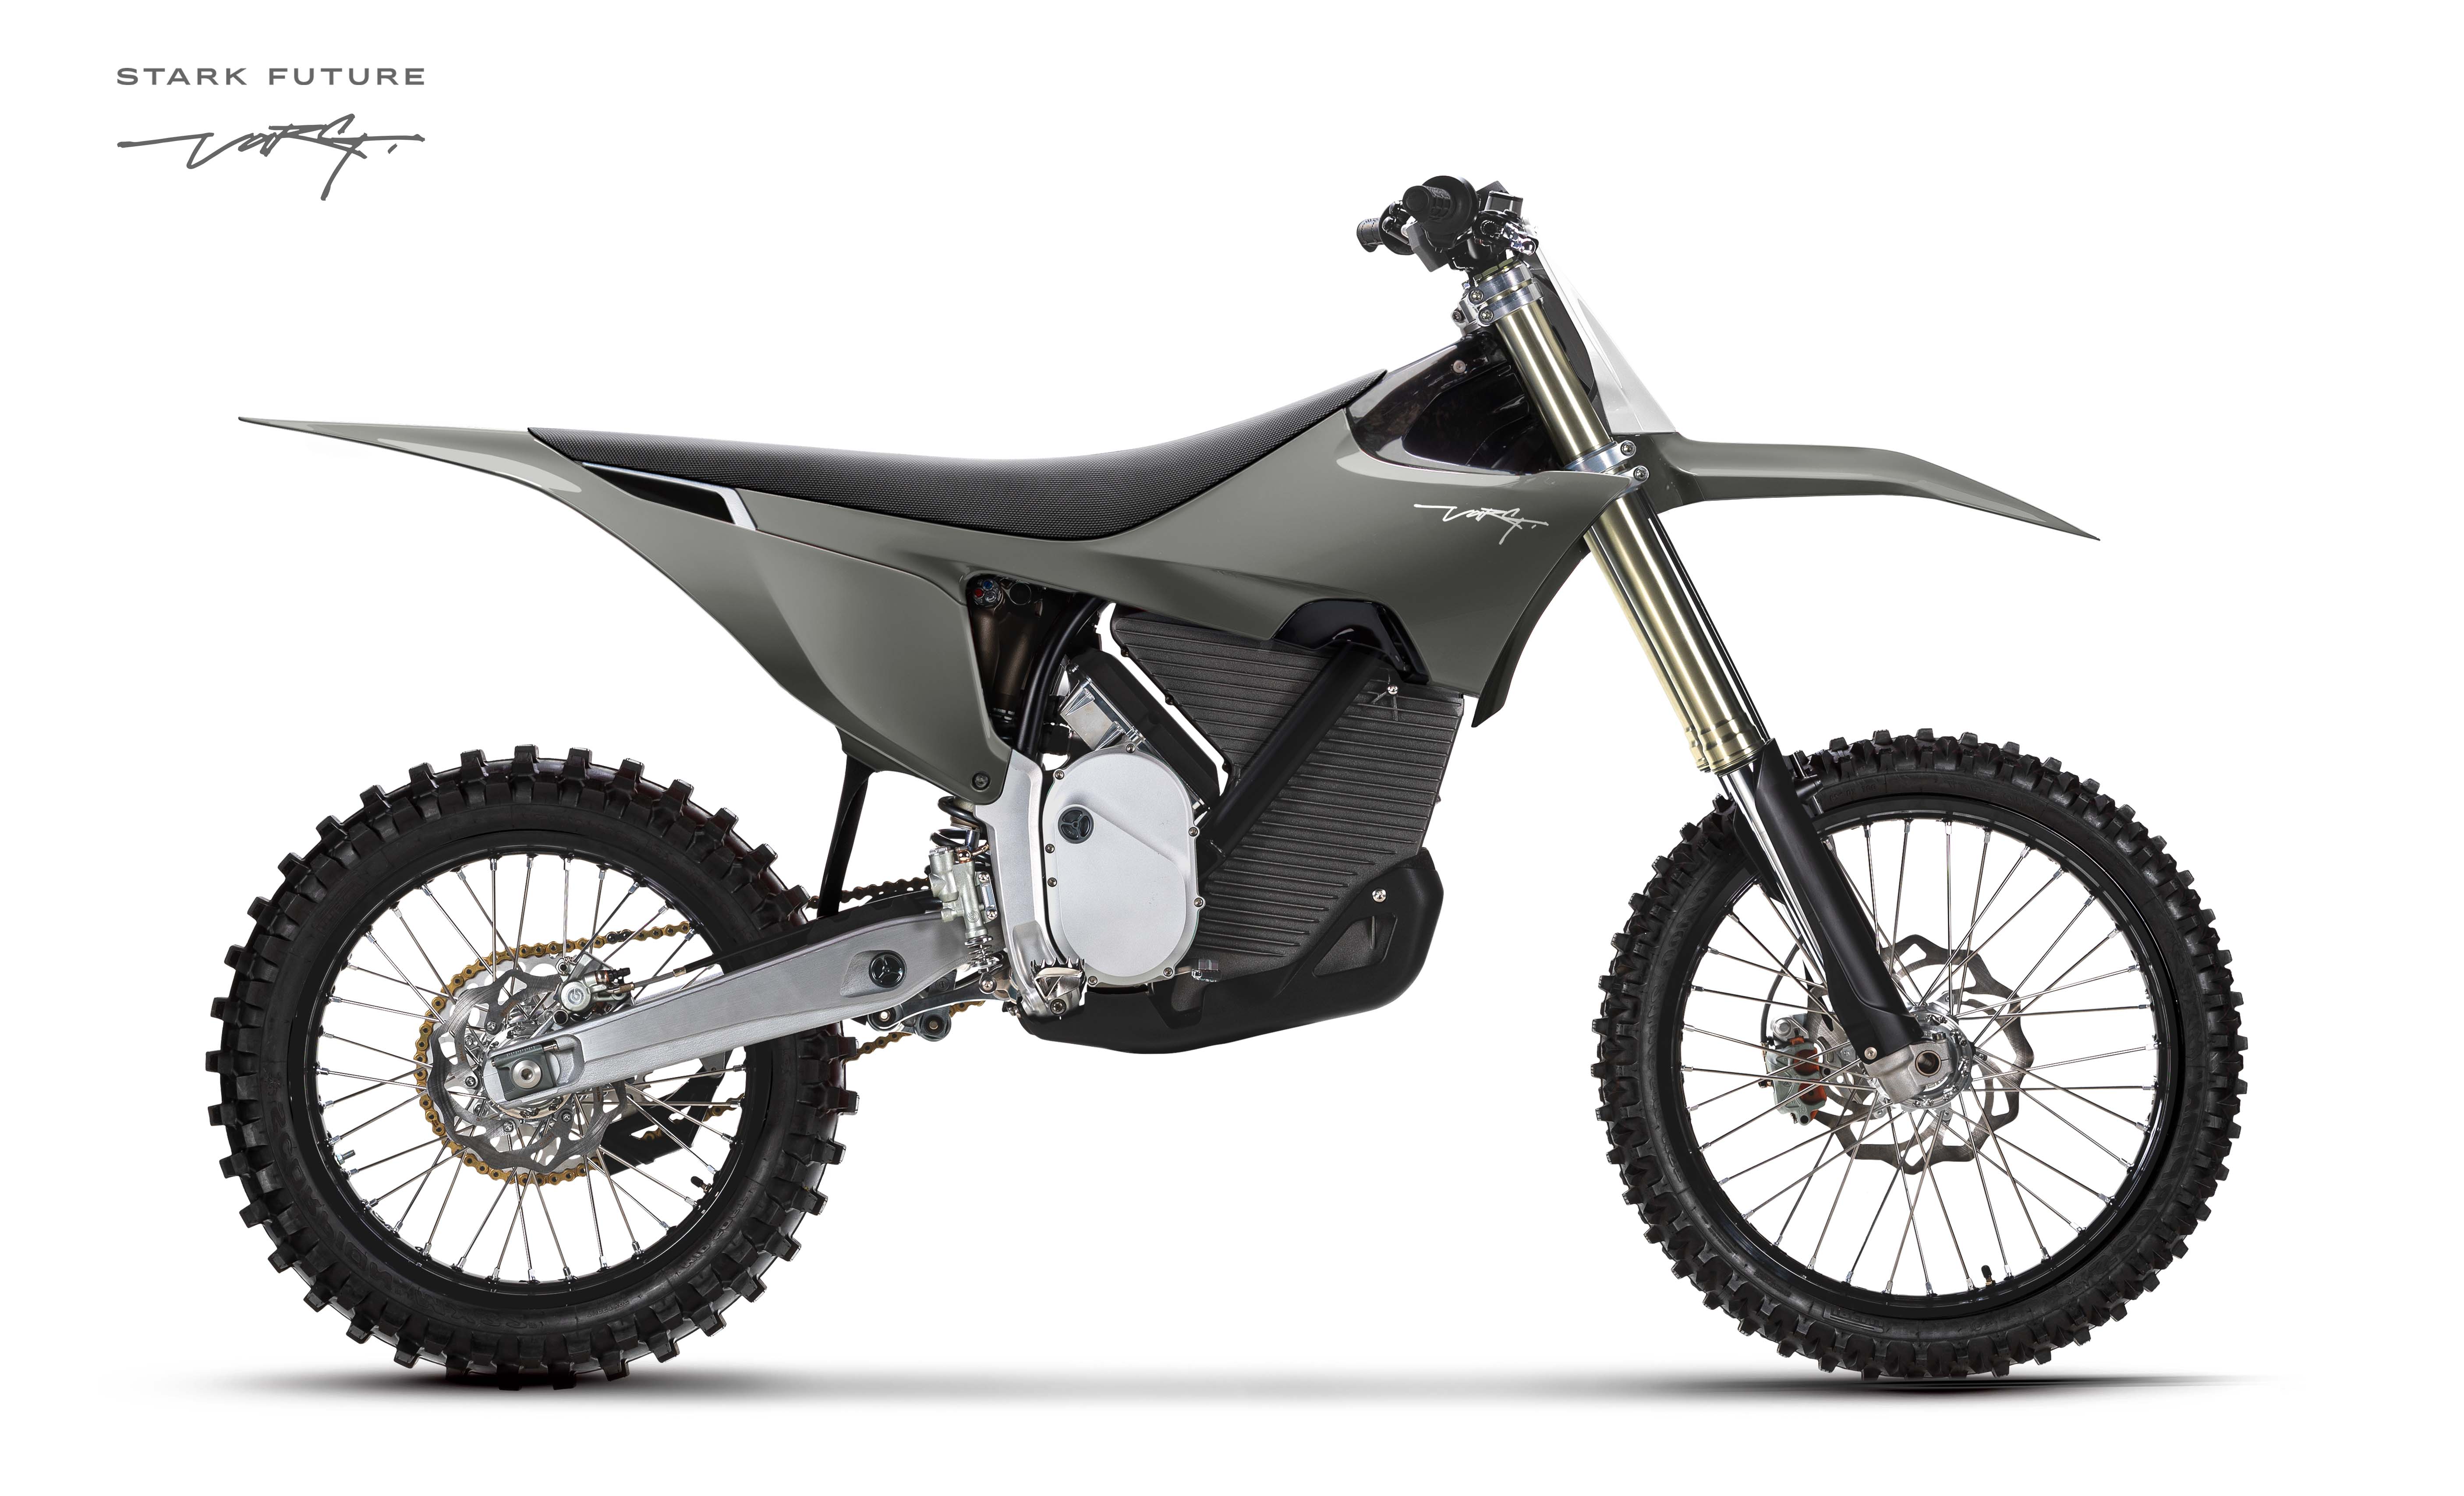 Stark Varg electric motorcycle in Forest Grey, angled view